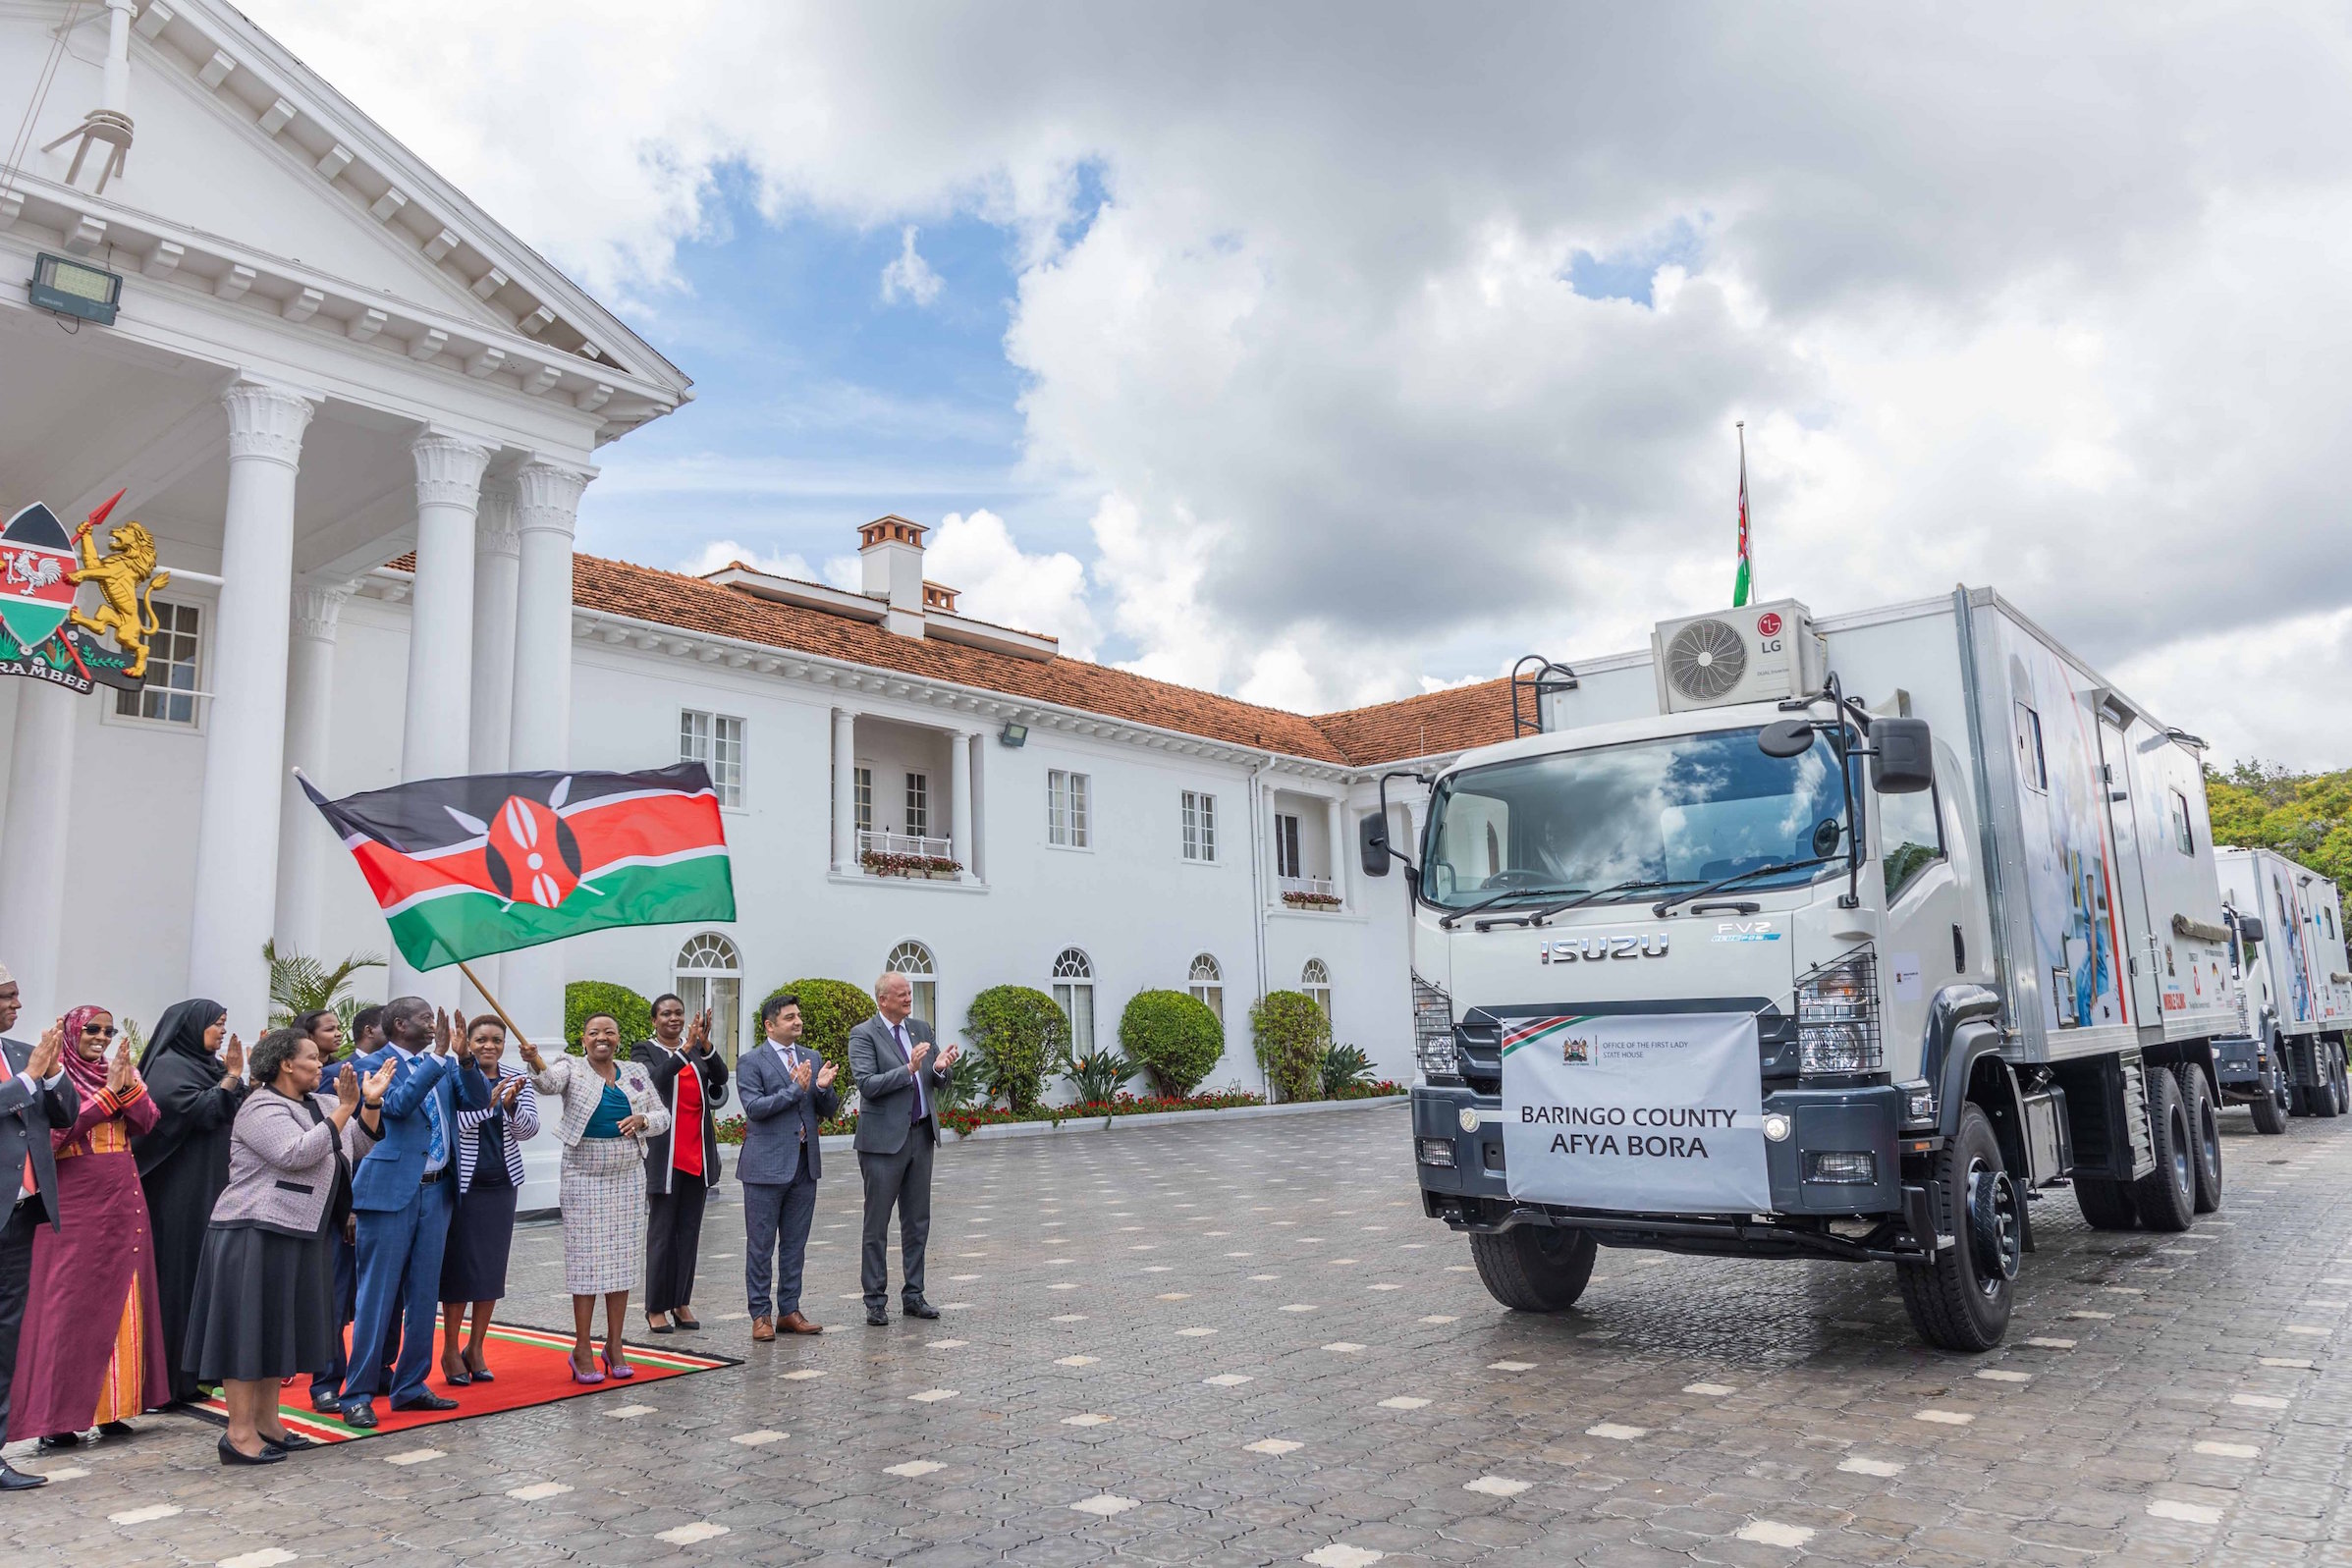 H.E. Mama Rachel Ruto, Kenya's First Lady, flags off three mobile clinics, fridges and transport freezers at State House donated by Aga Khan University Hospital and financed by the German Government through a grant offered by the German Development Bank (KFW). The donation valued at KES 63 million will support the implementation of the Universal Health Coverage programme in seven counties including Baringo, Marsabit, Samburu, Turkana, West Pokot, Mandera and Isiolo.